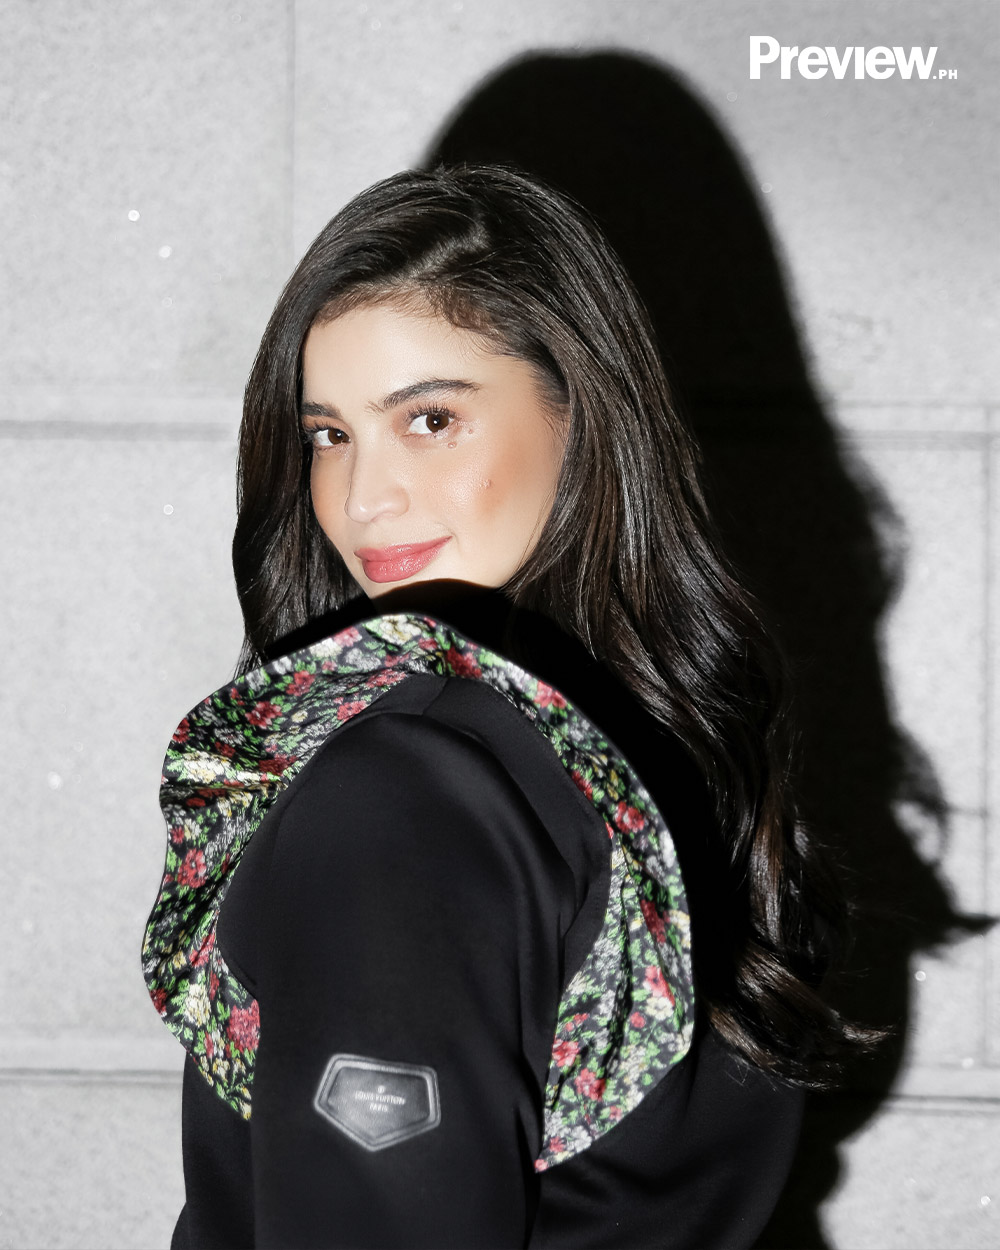 One Music PH - LOOK: Anne Curtis posed for the cover of Metro Society,  which was taken during her trip to South Korea last year for the opening of  Maison Louis Vuitton.